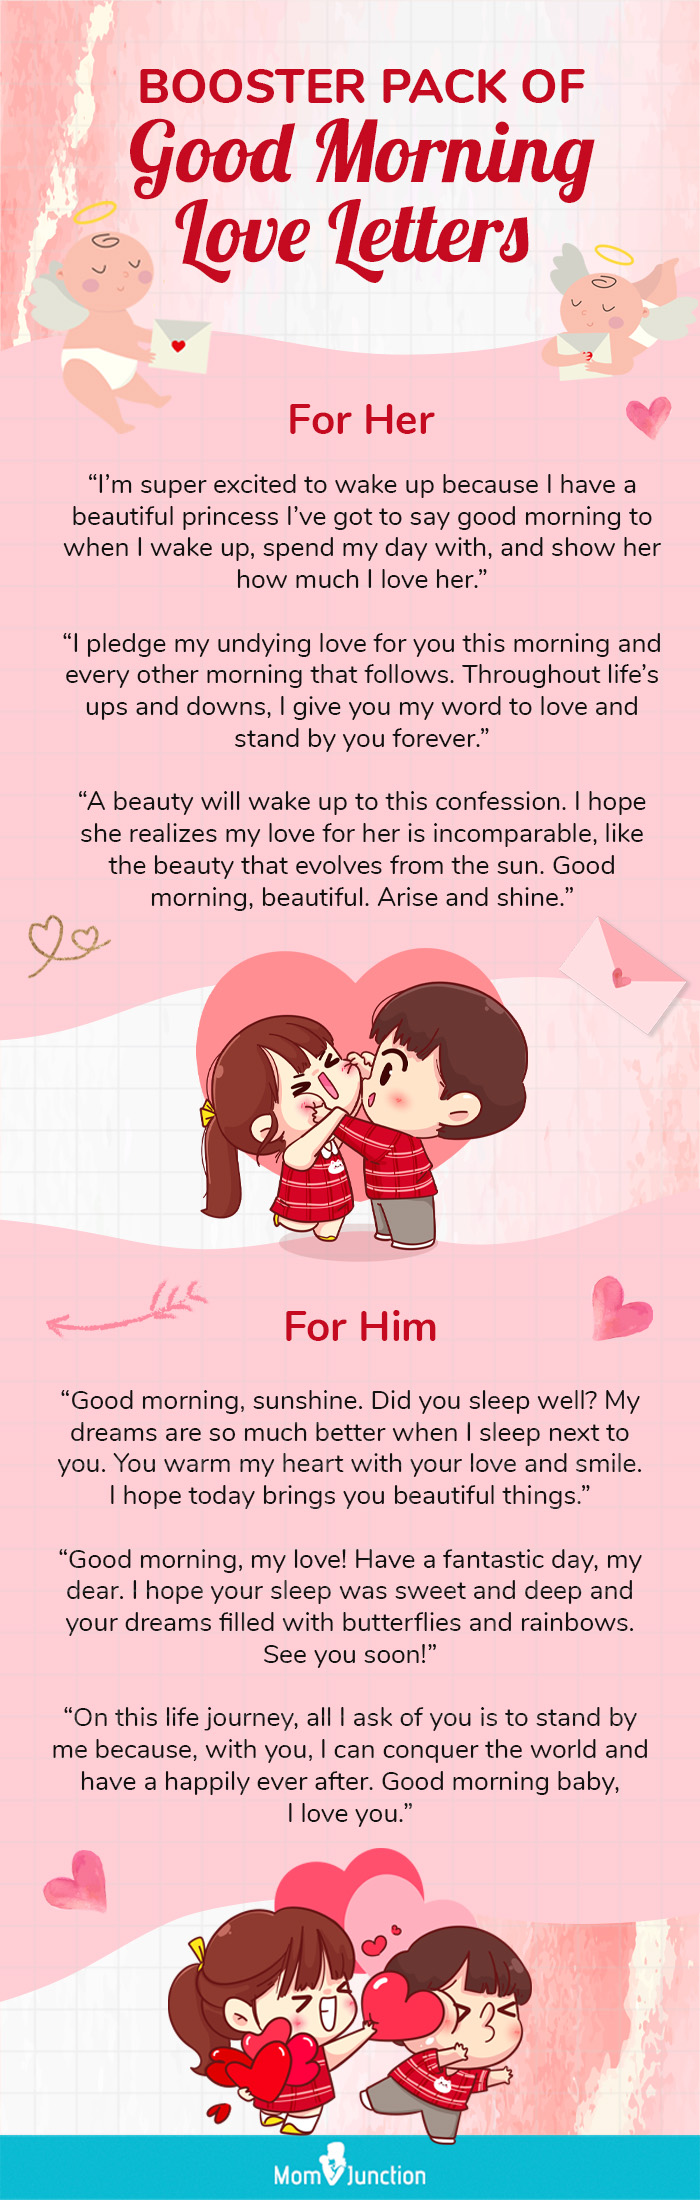 75 Cute Good Morning Love Letters For Her And Him